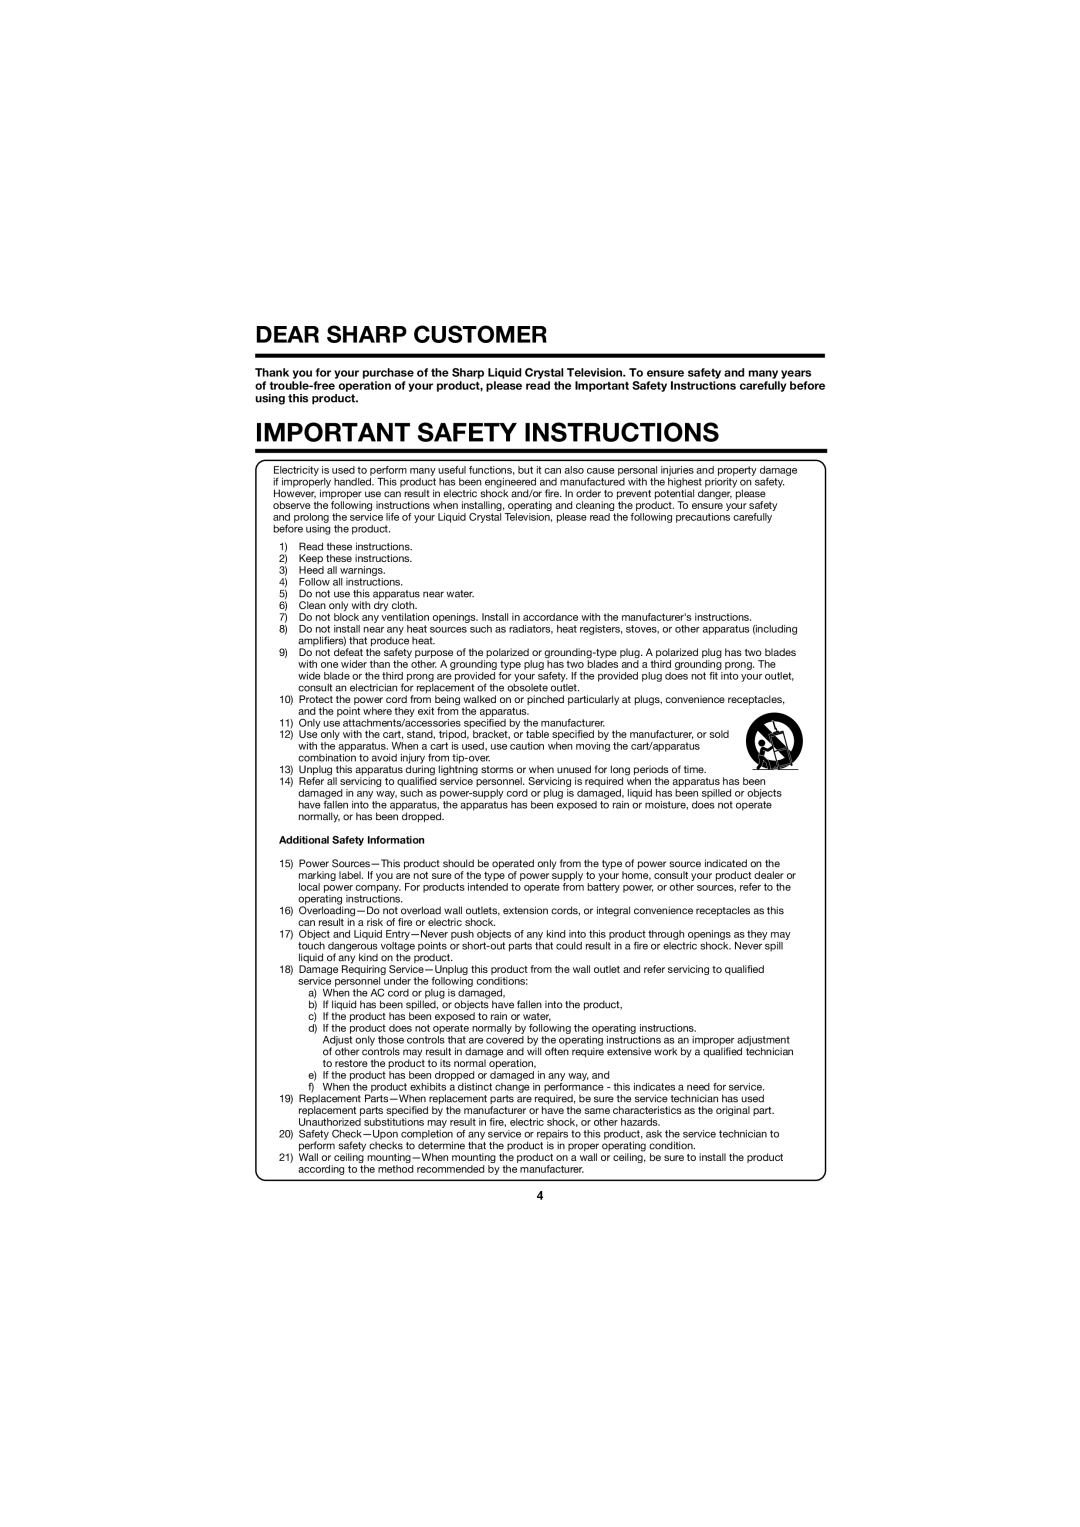 Sharp LC-40D78UN operation manual Important Safety Instructions, Dear Sharp Customer, Additional Safety Information 